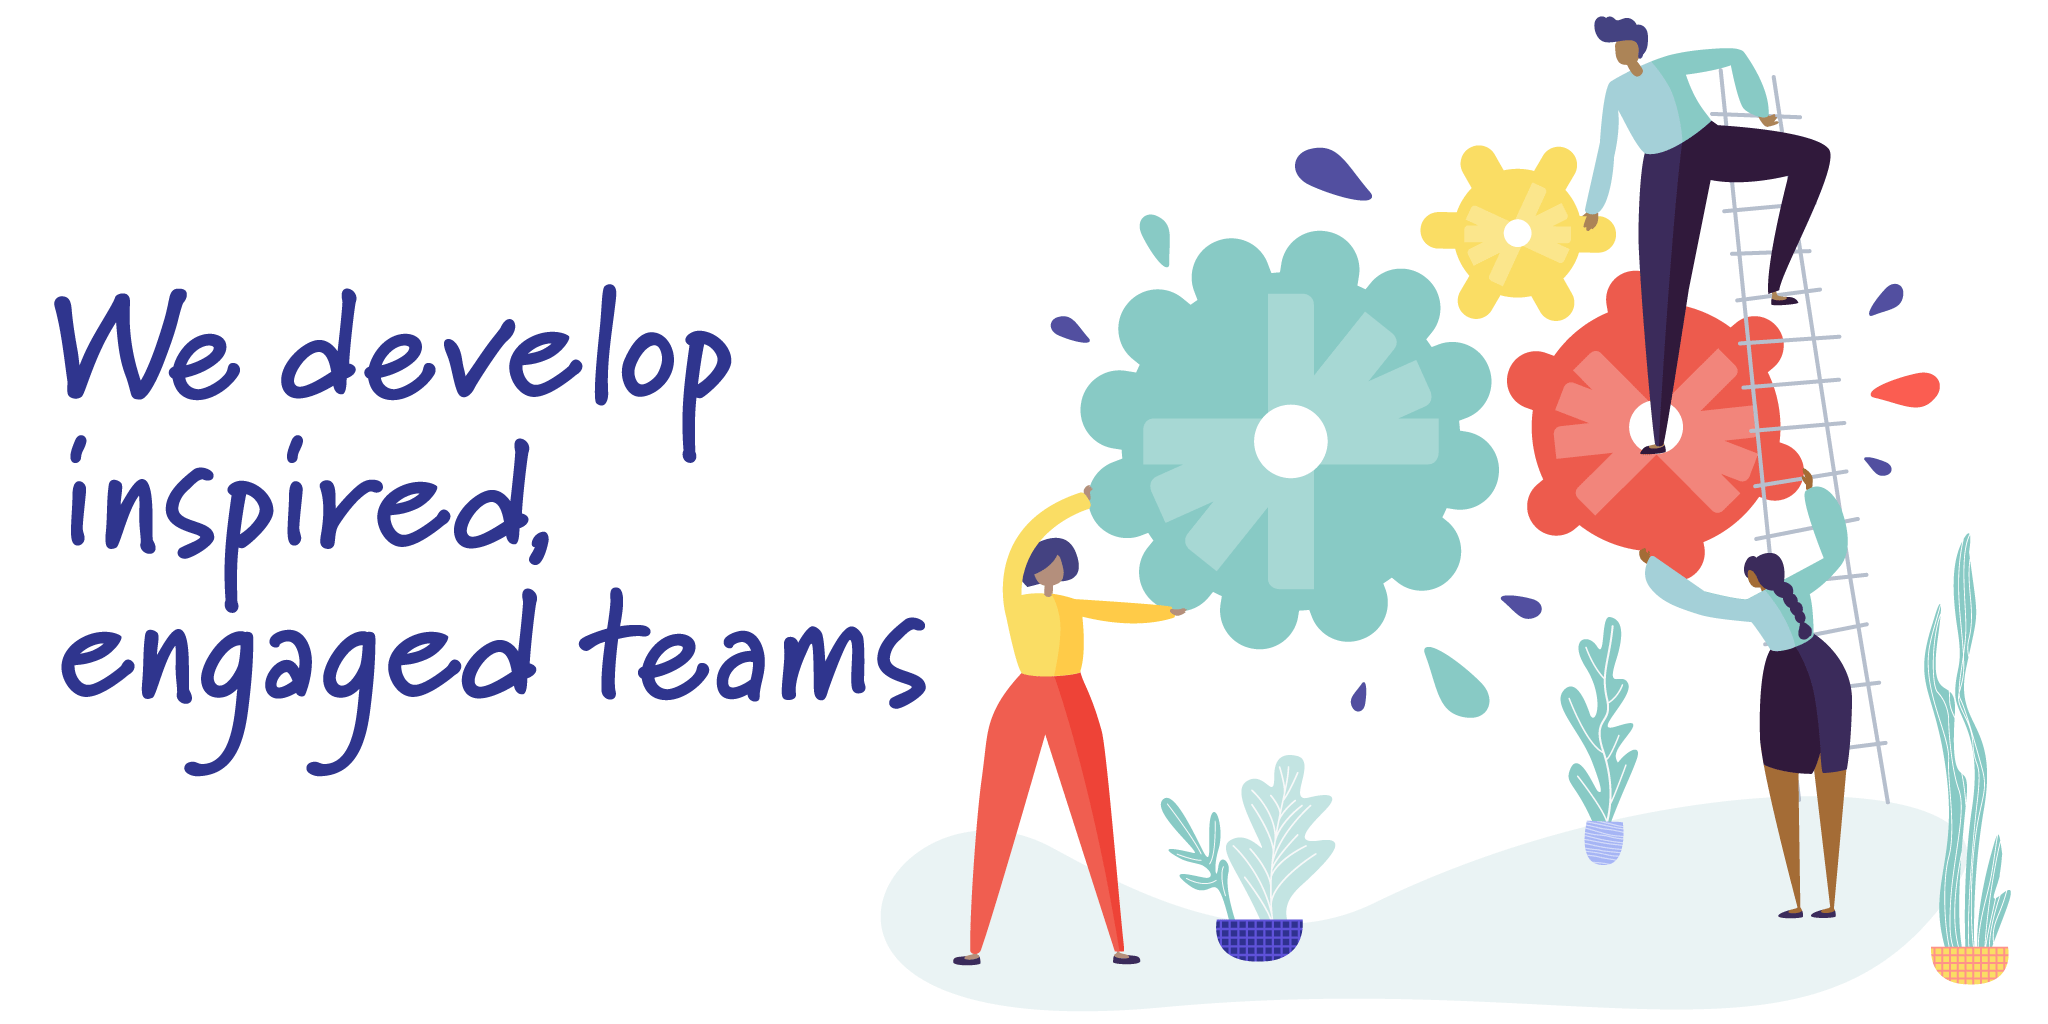 We develop inspired, engaged teams